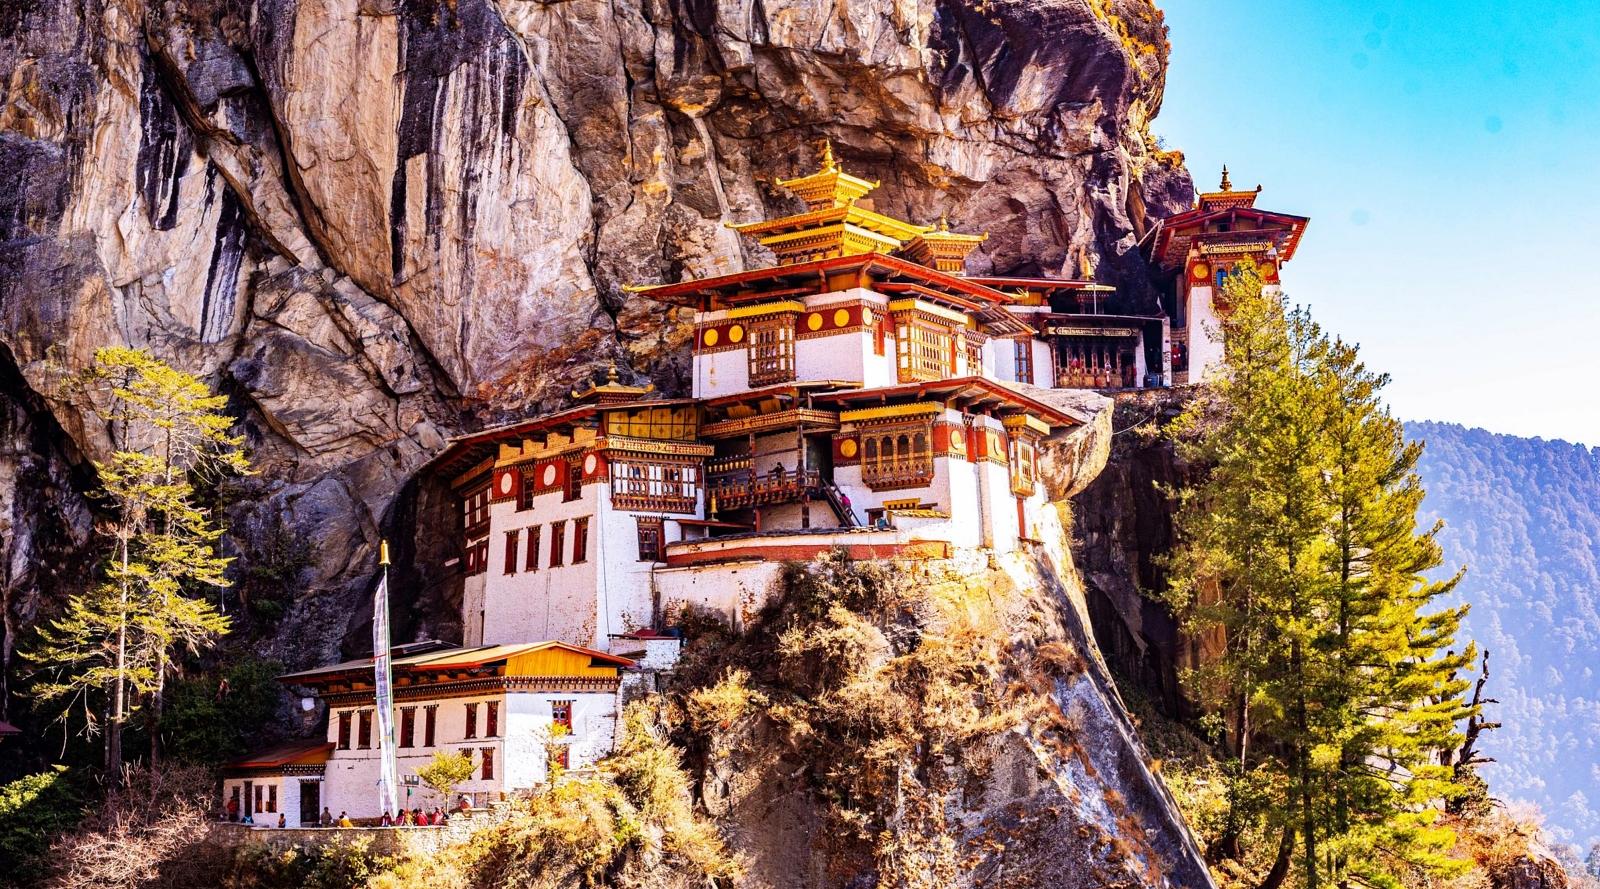 How to get to the Tiger’s Nest (Paro Taktsang) Monastery in Bhutan